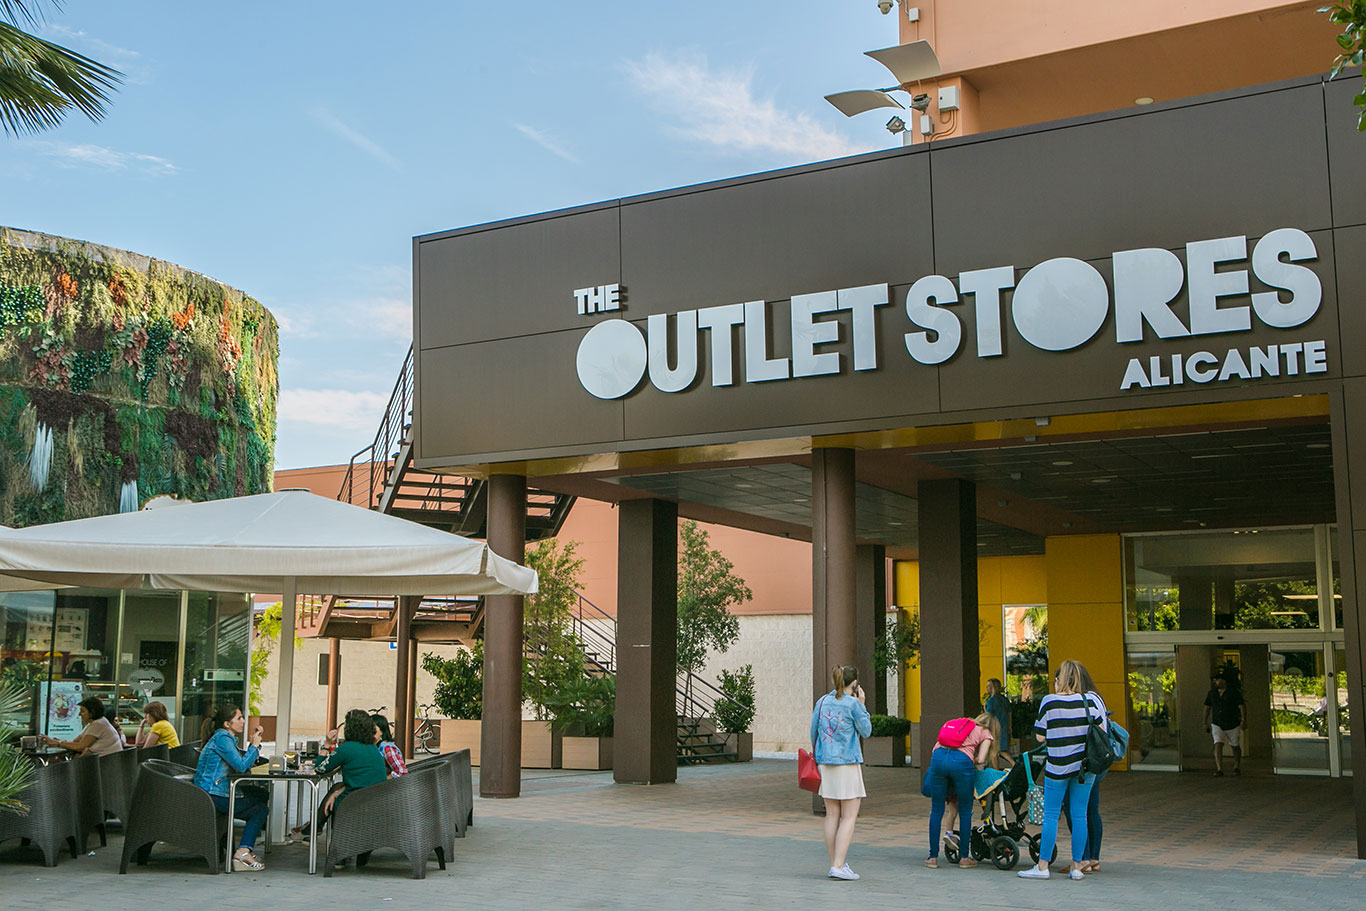 Information - The Outlet Stores Alicante